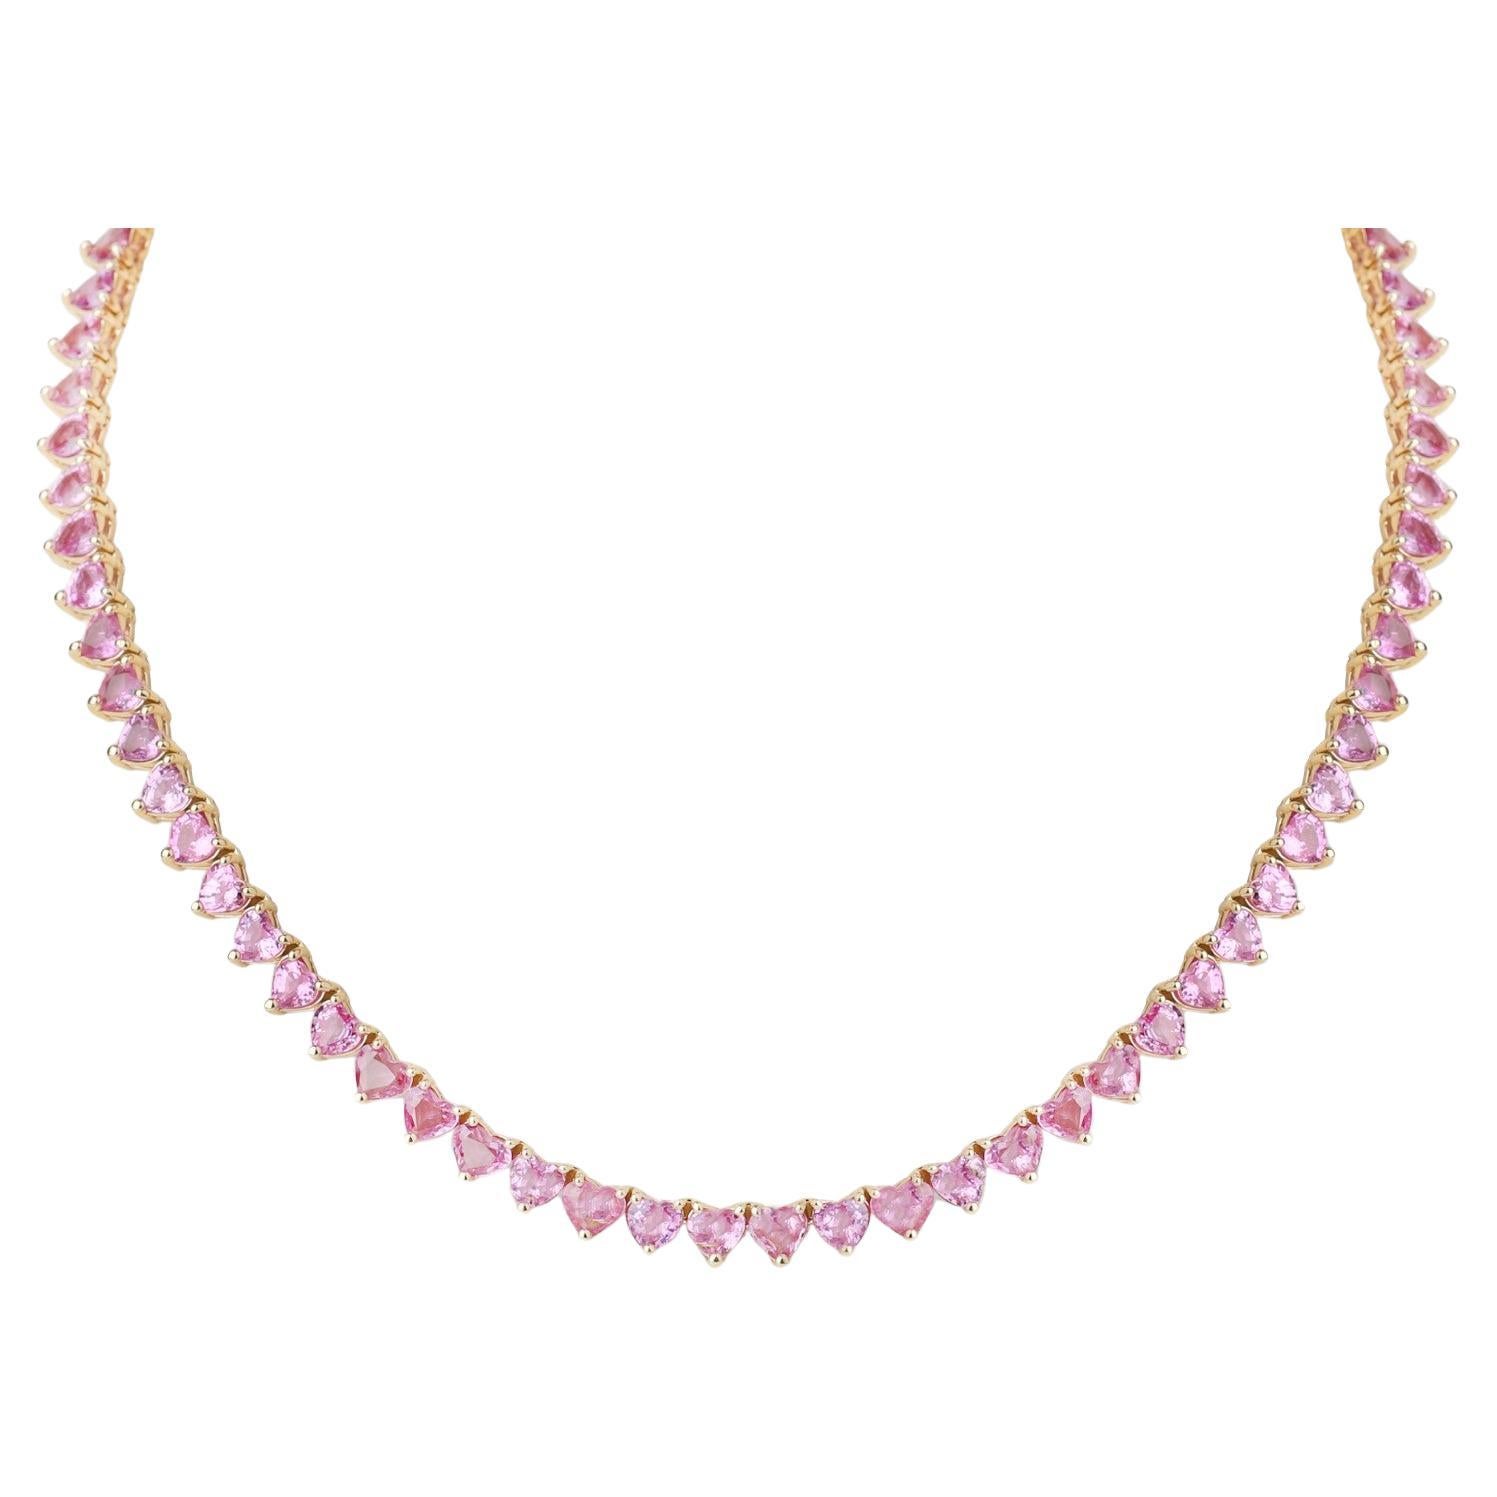 This necklace features a heart-shaped pink sapphires totaling 36.68cts  set in 18kt white gold all stones are perfectly matched and calibrated for maximum brilliance.